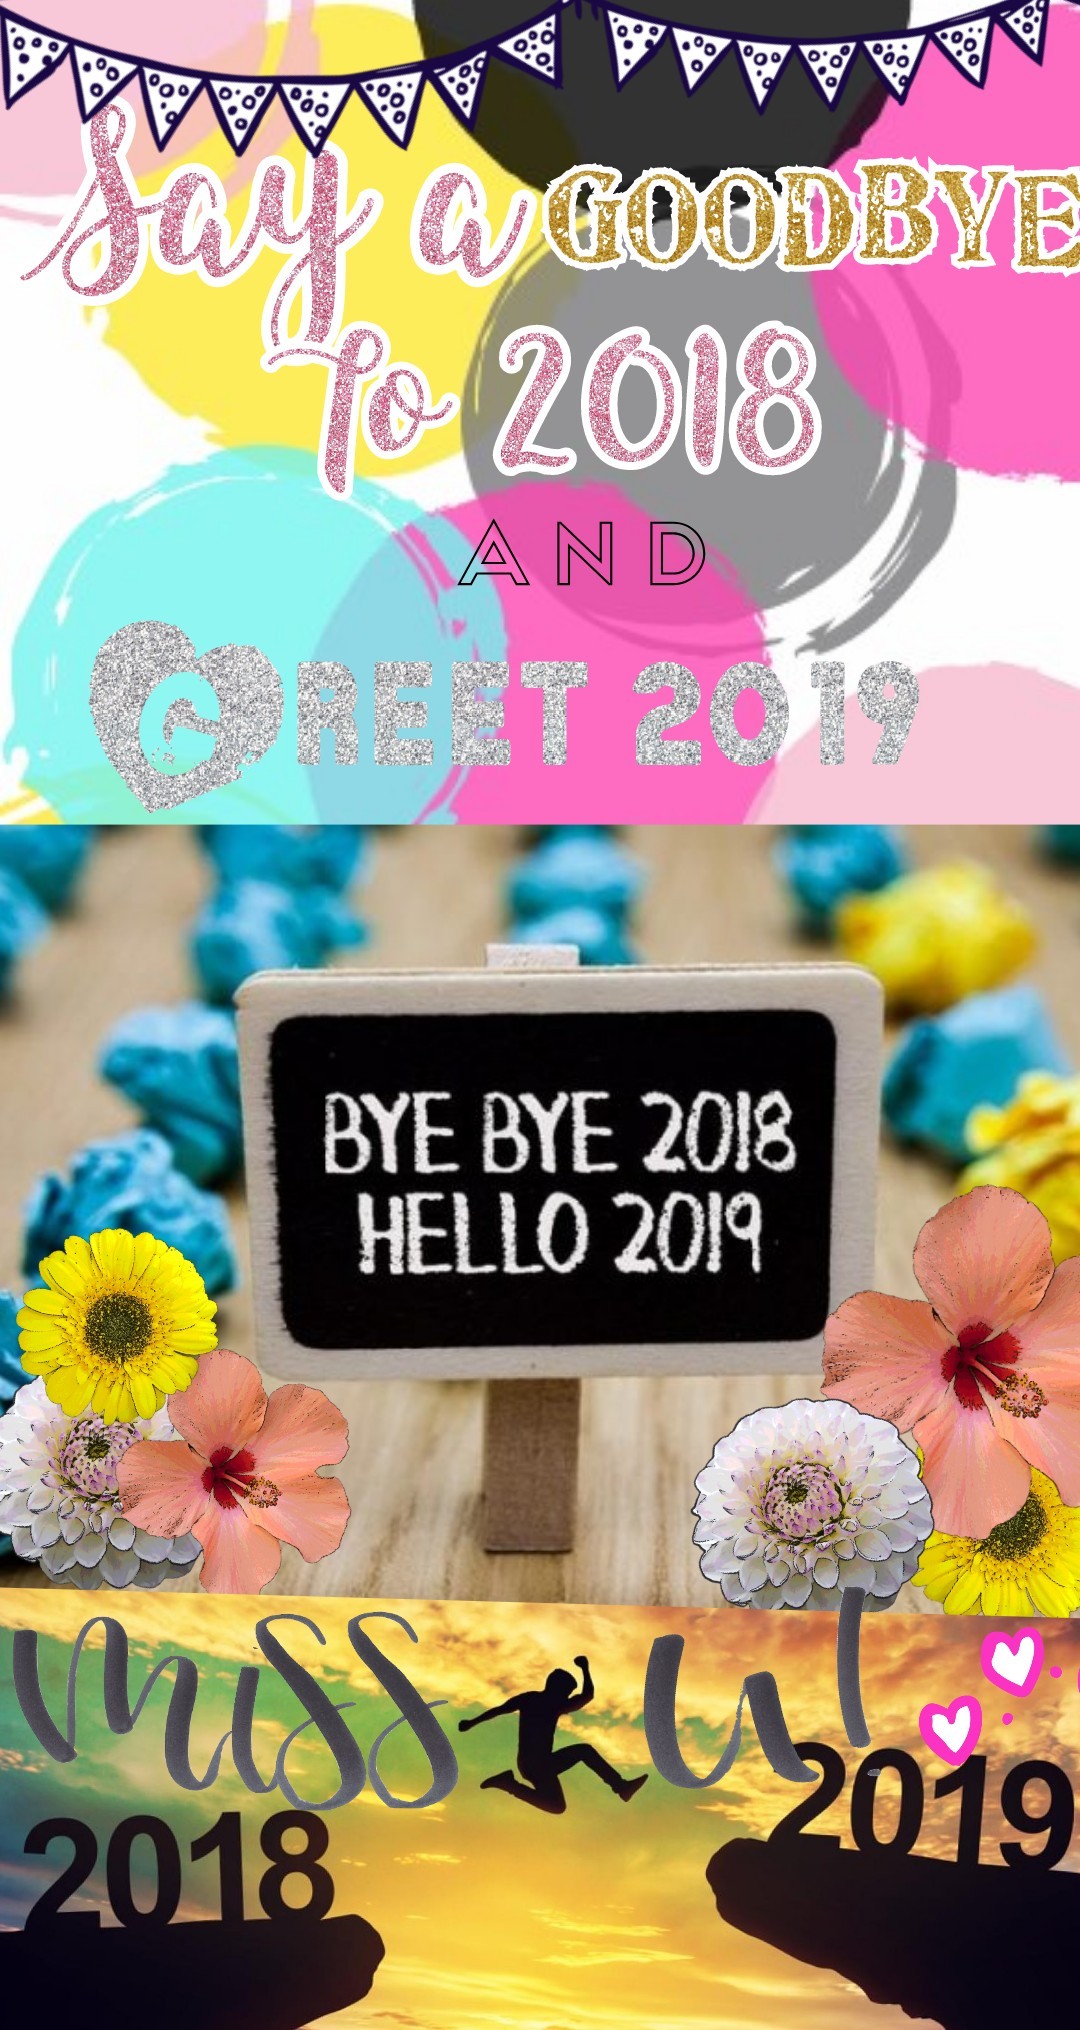 I can't believe it!! tap
2018 is over sooooo fast and 2019 is coming! HAPPY NEW YEAR EVERYONE!! 😄😄🌸🌸💐💐😄😄